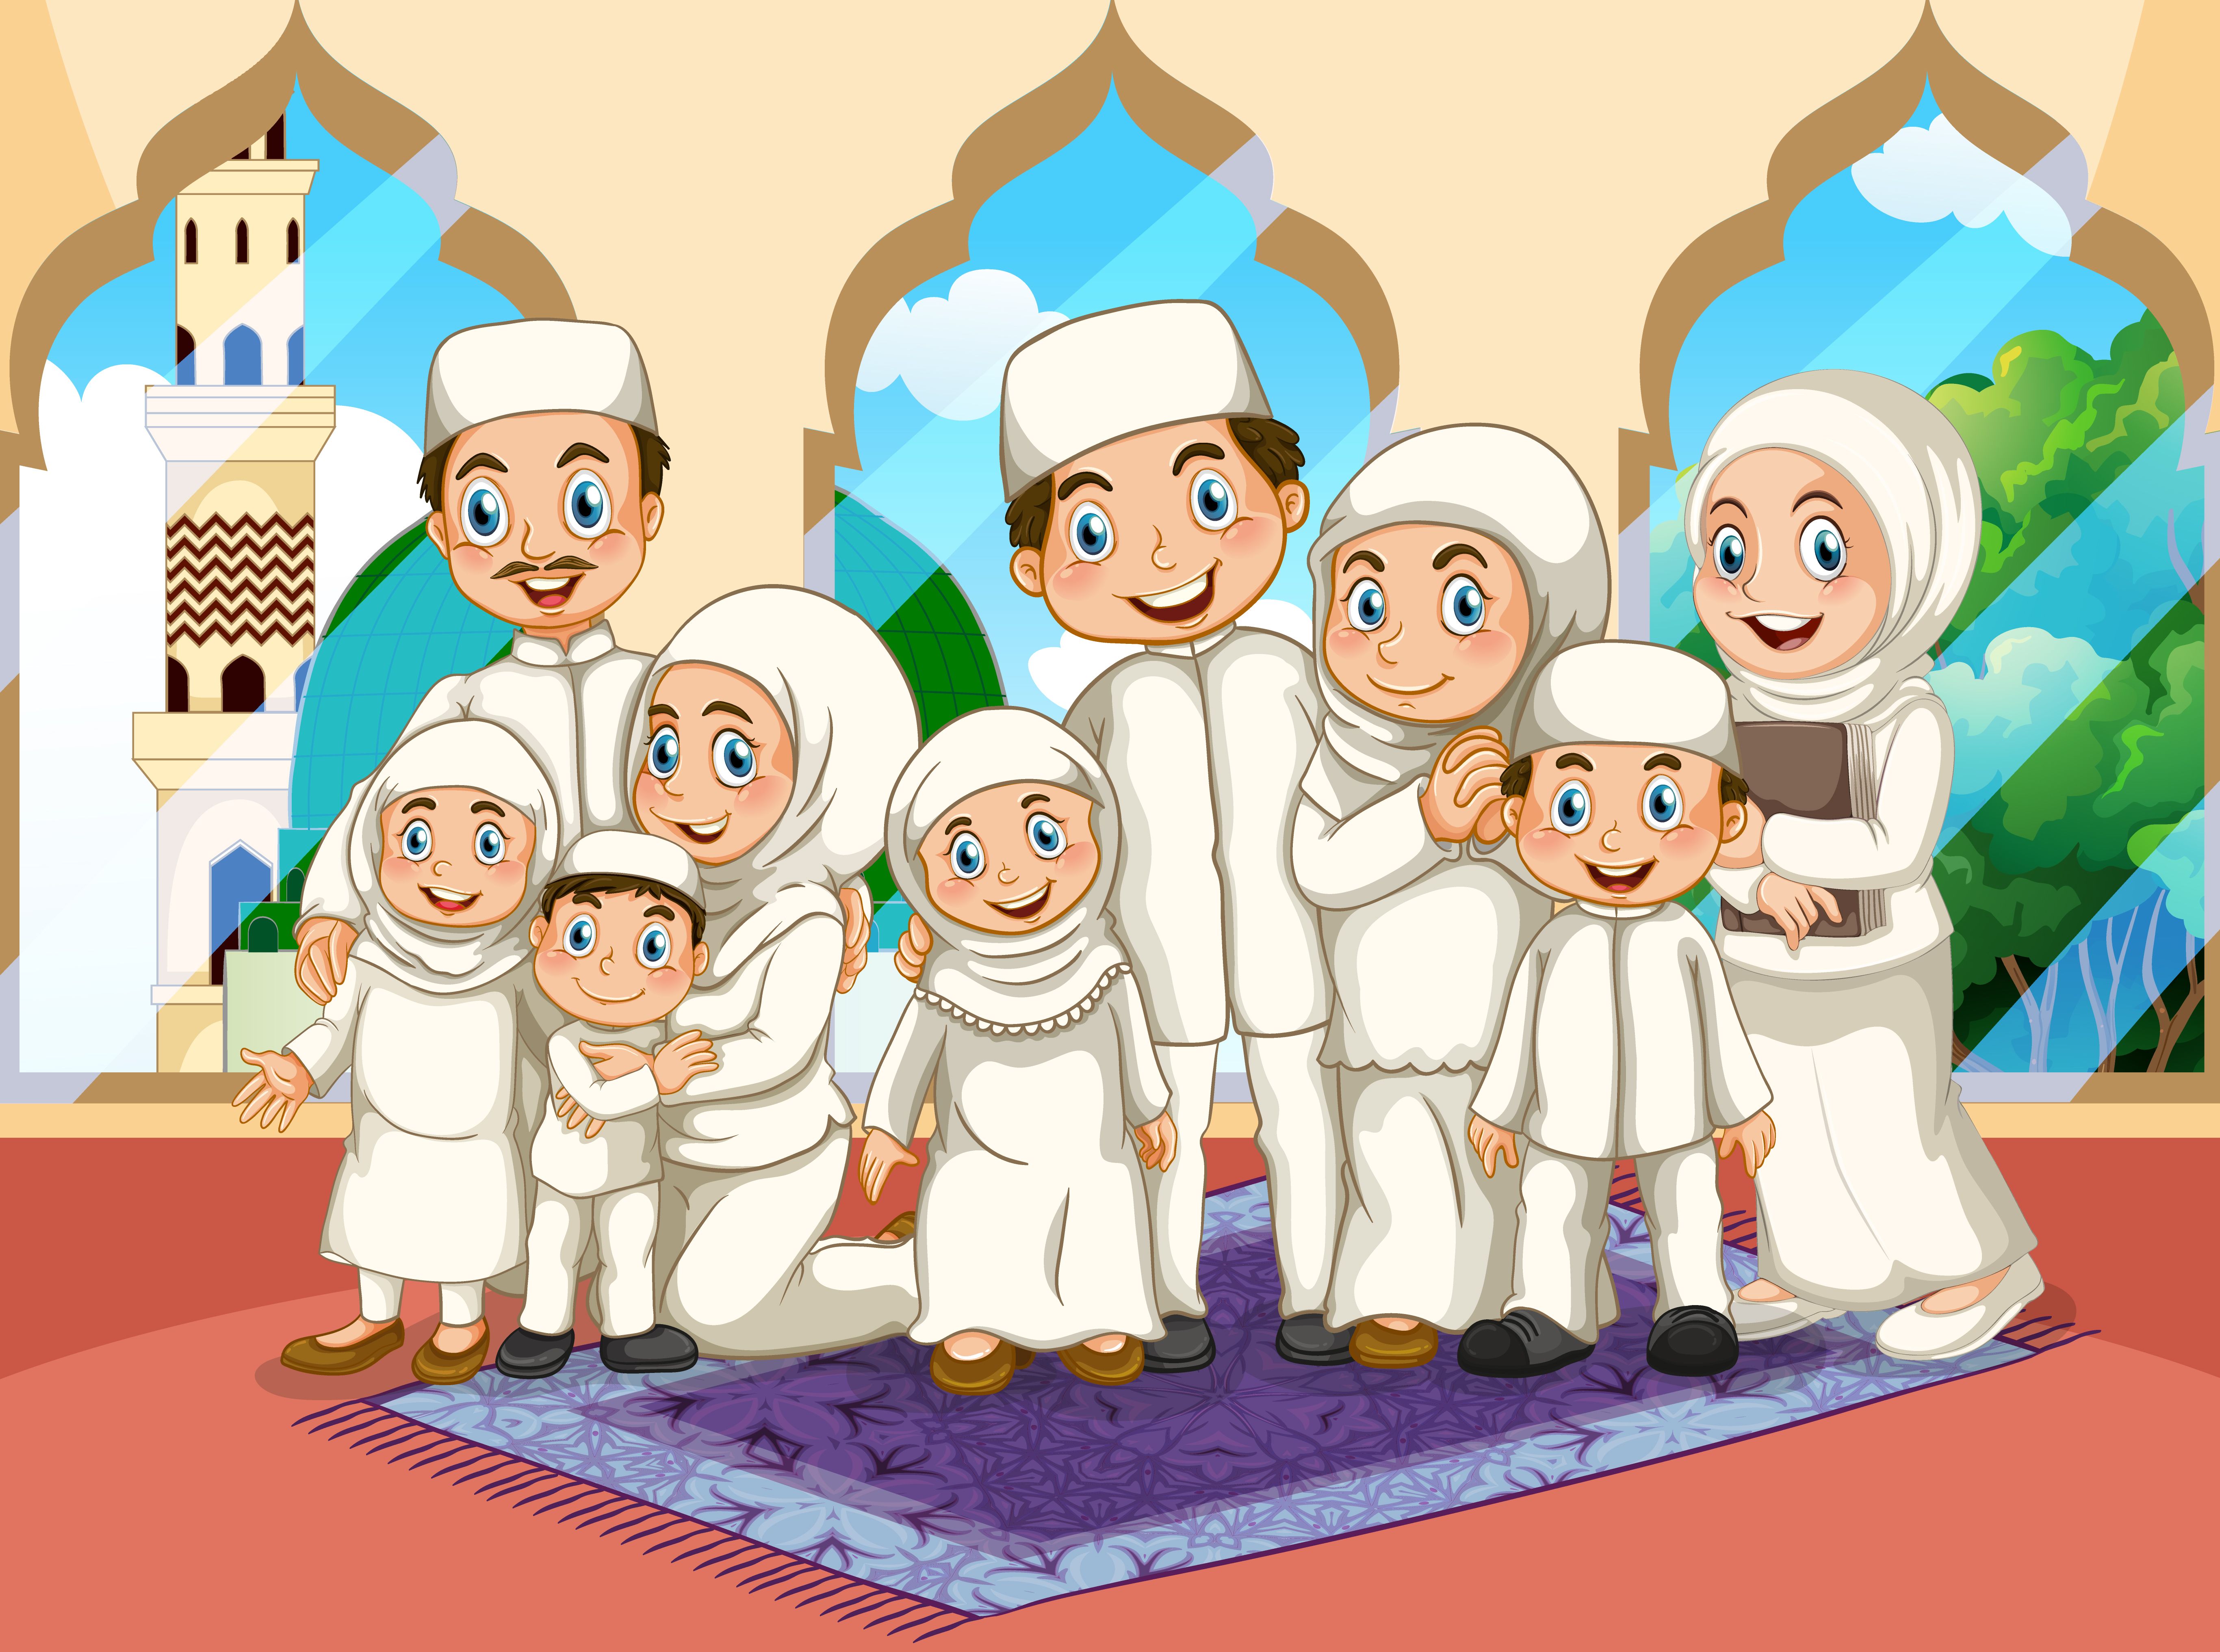 Muslim Girl Cartoon With Family Wallpapers - Wallpaper Cave